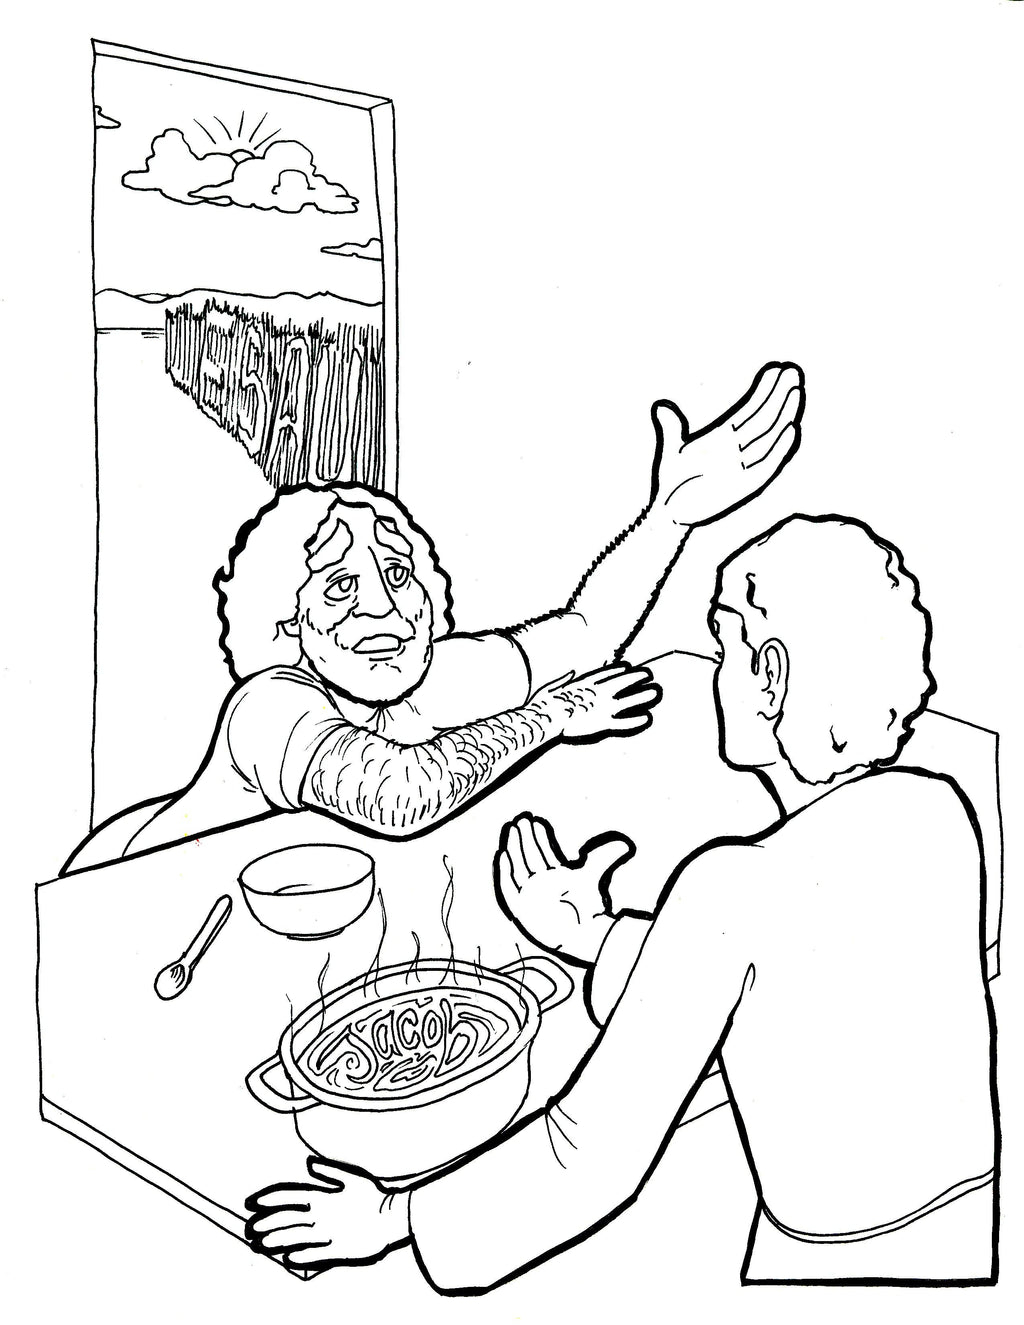 Jacob and esau coloring page